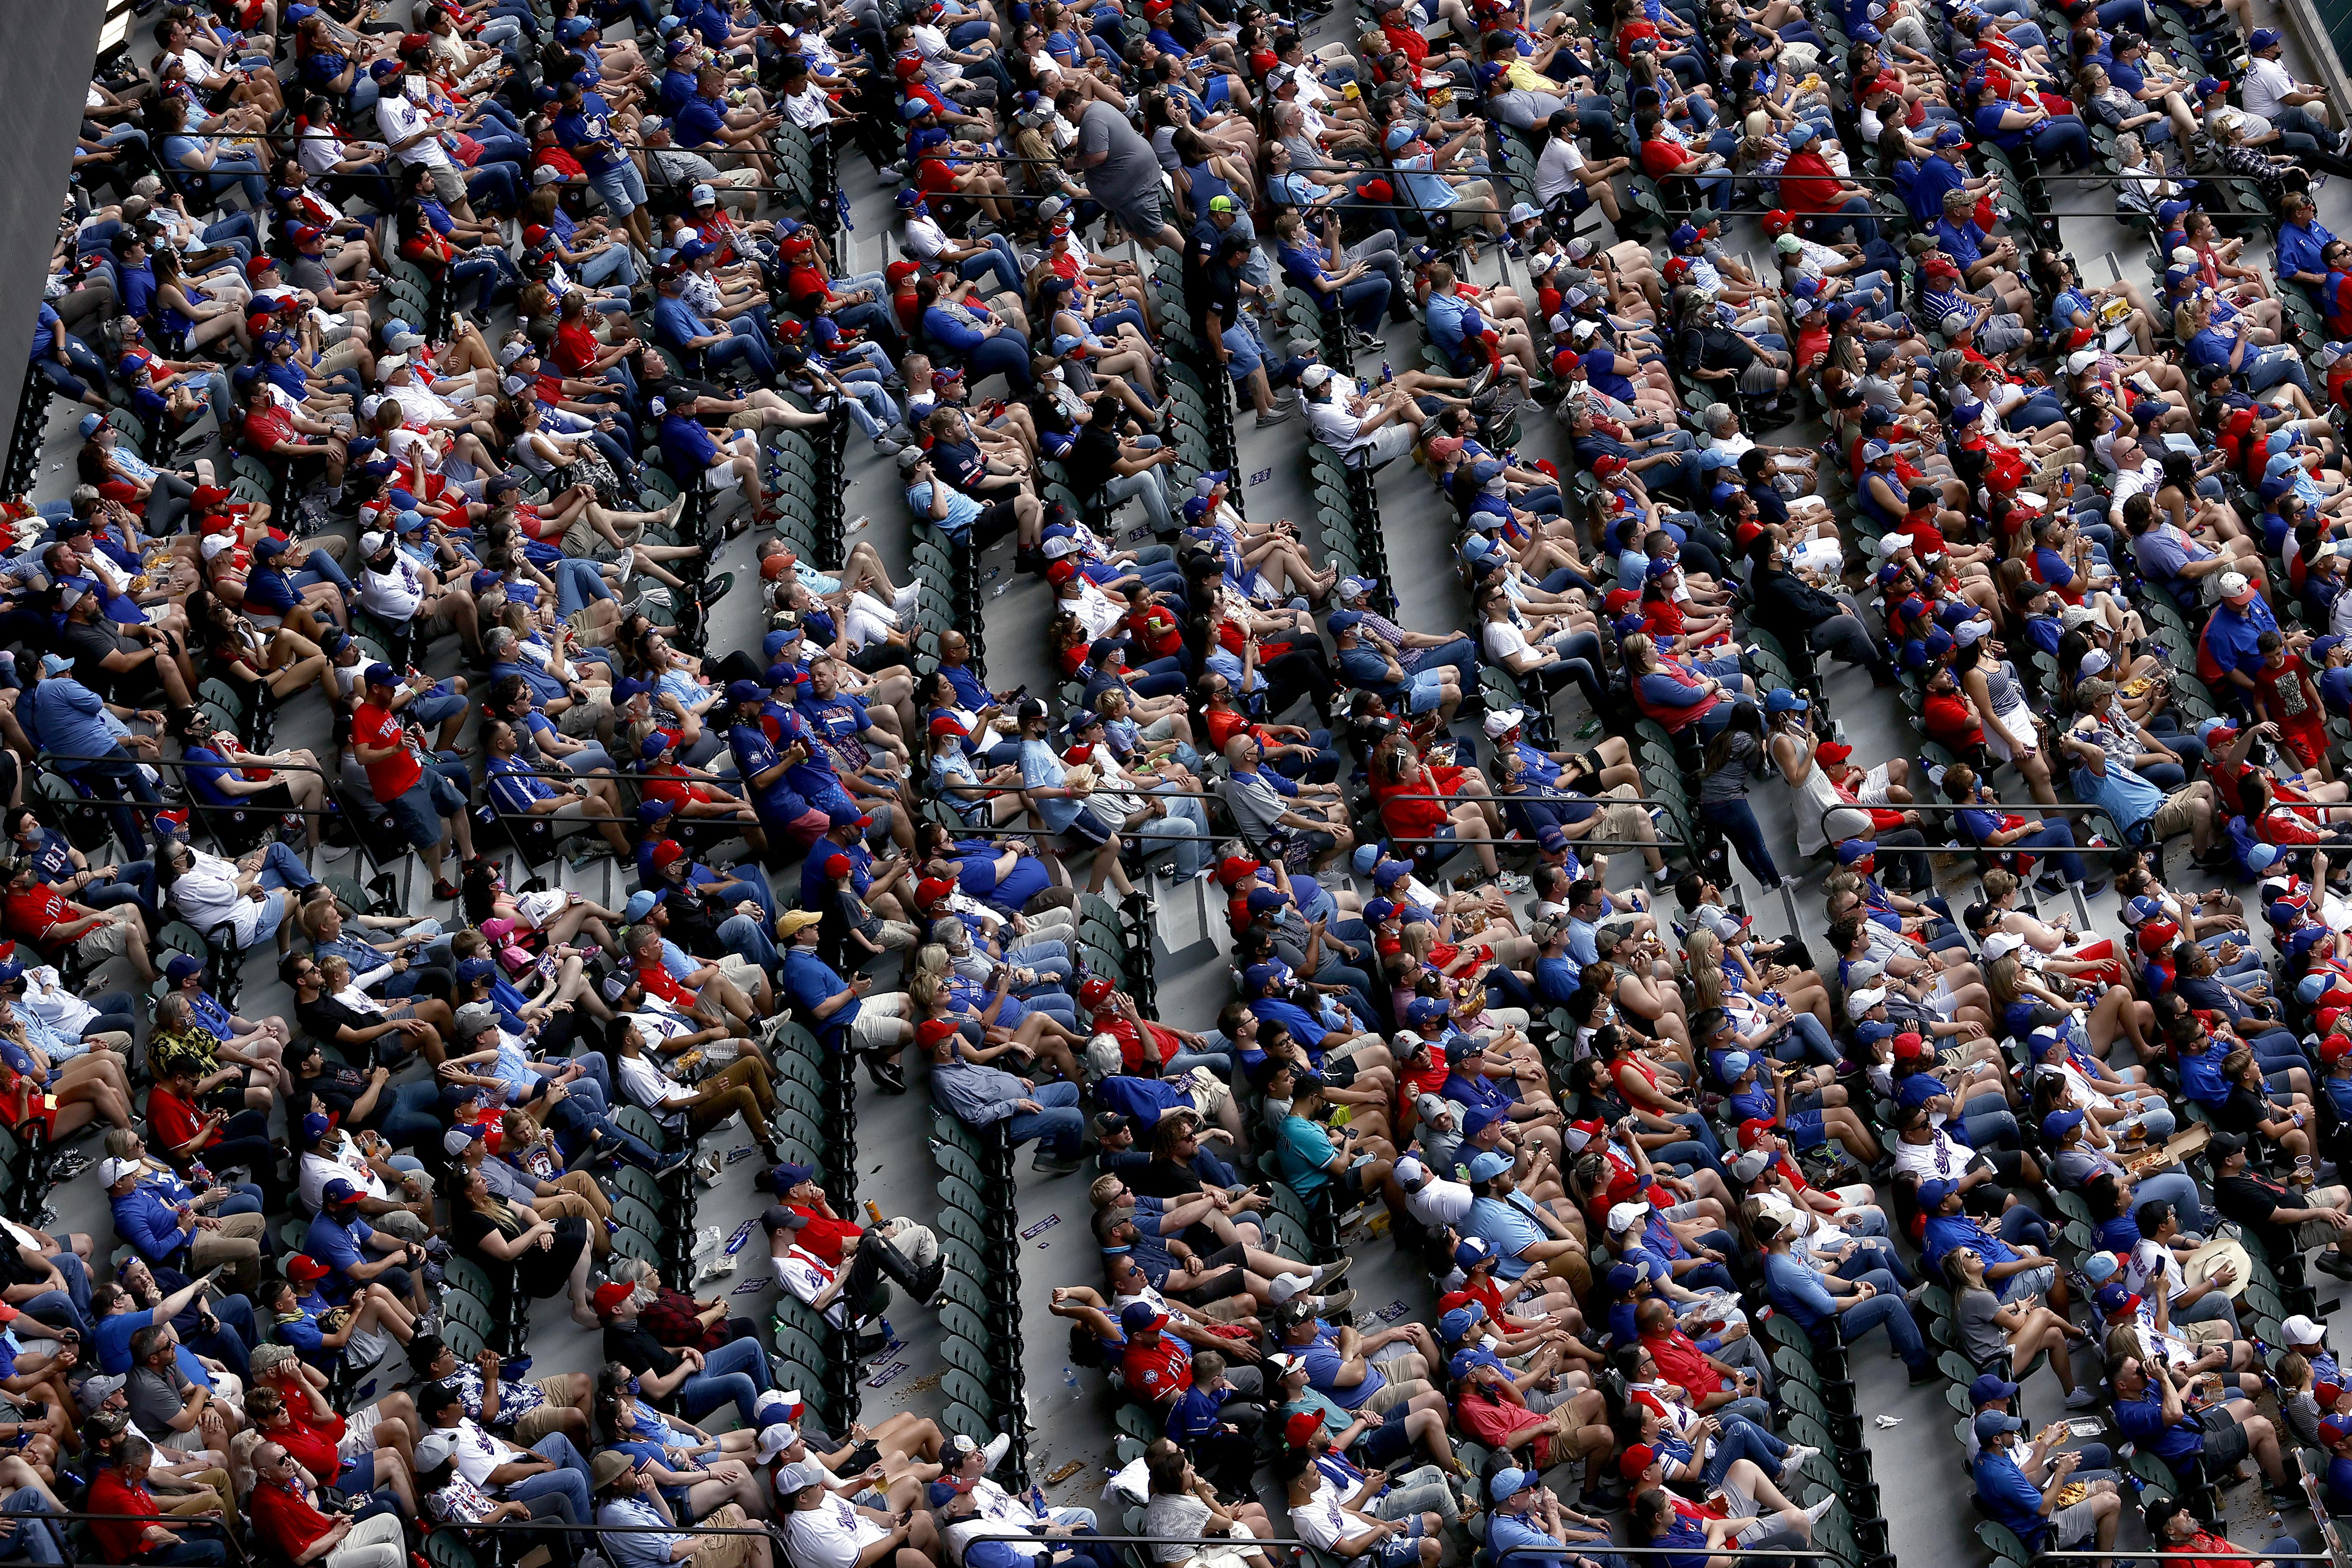 Row after row of Texas Rangers fans.